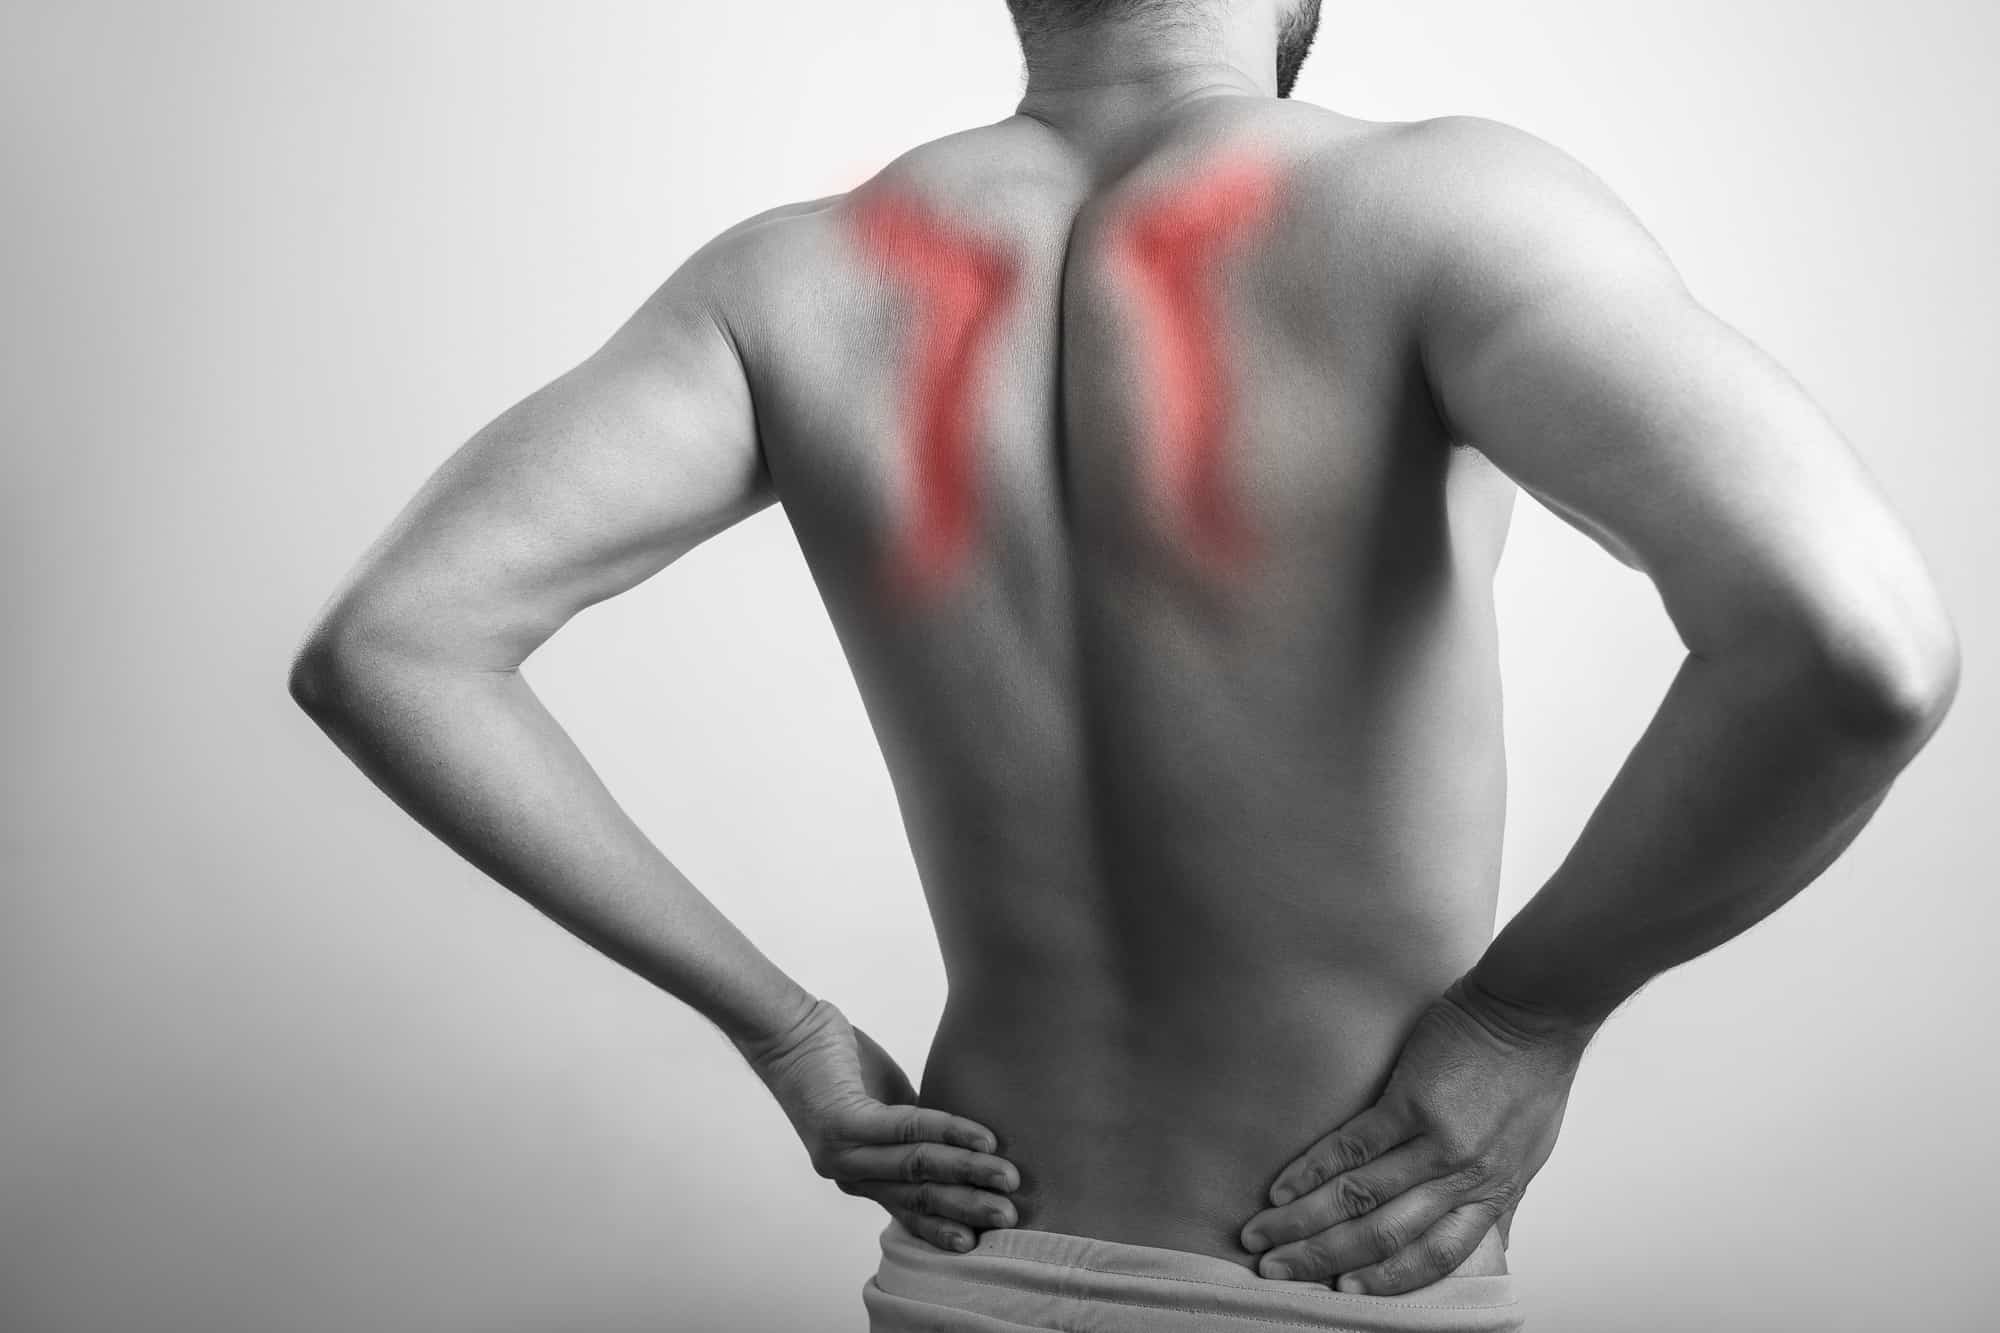 What’s Causing The Pain Between My Shoulder Blades?